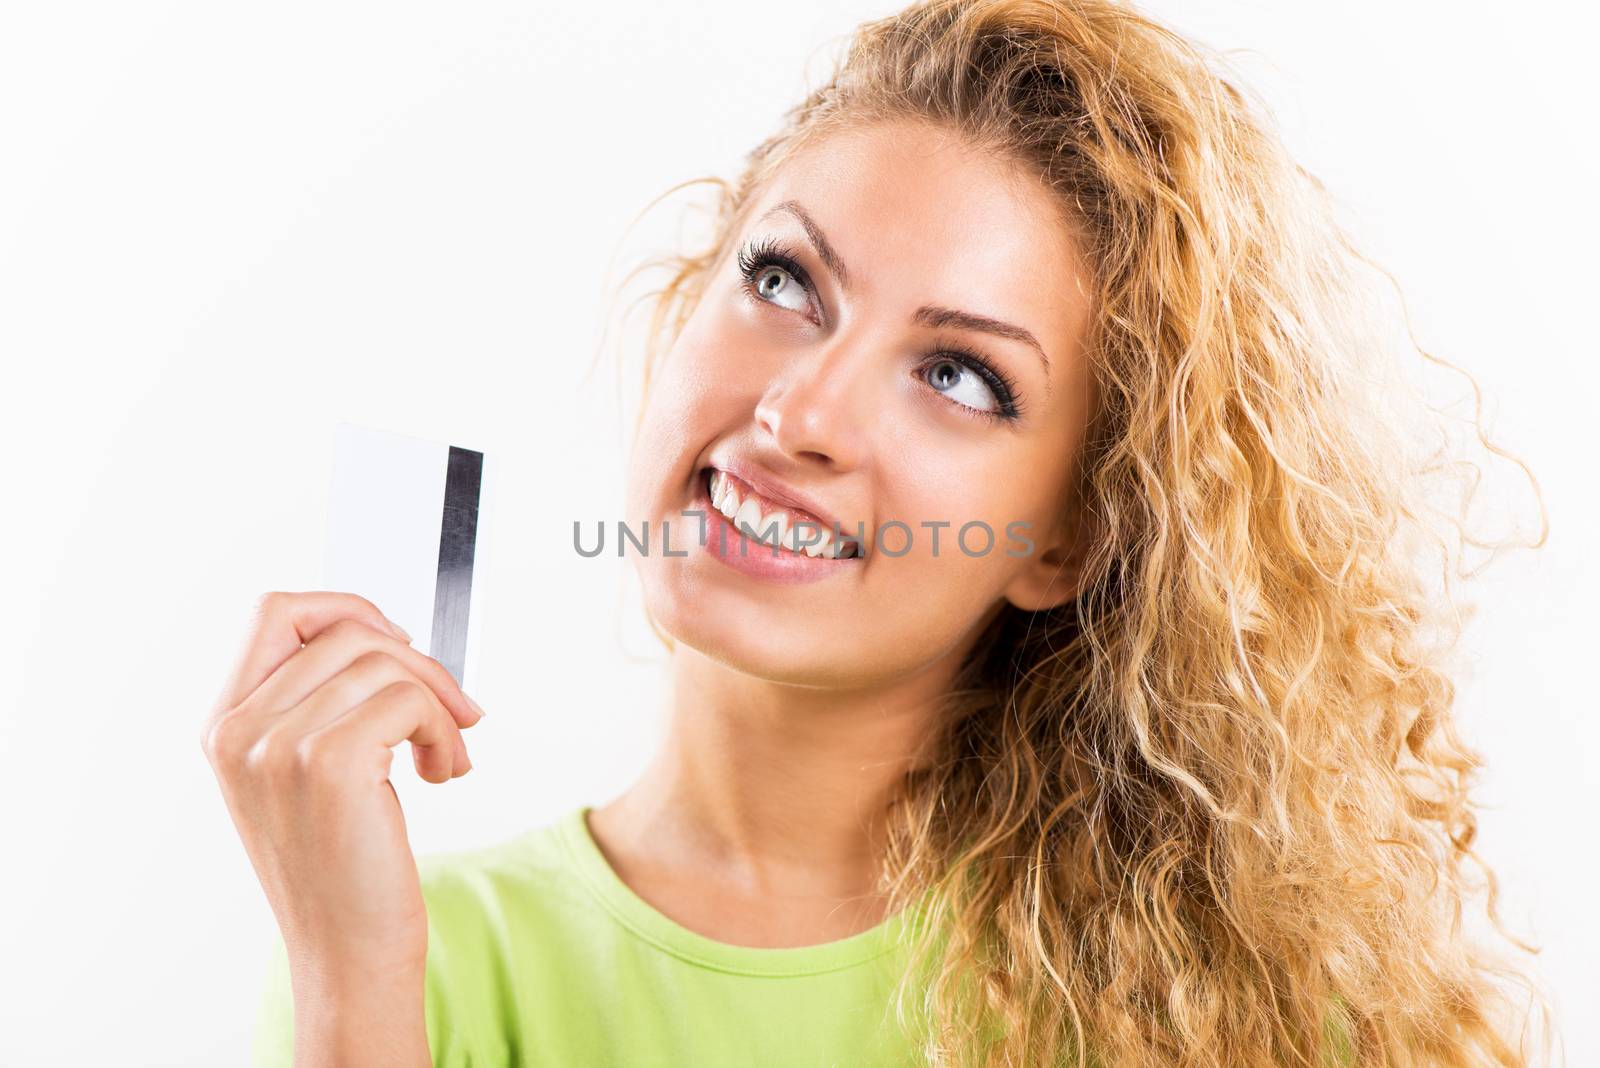 Cute Girl With Credit Card by MilanMarkovic78